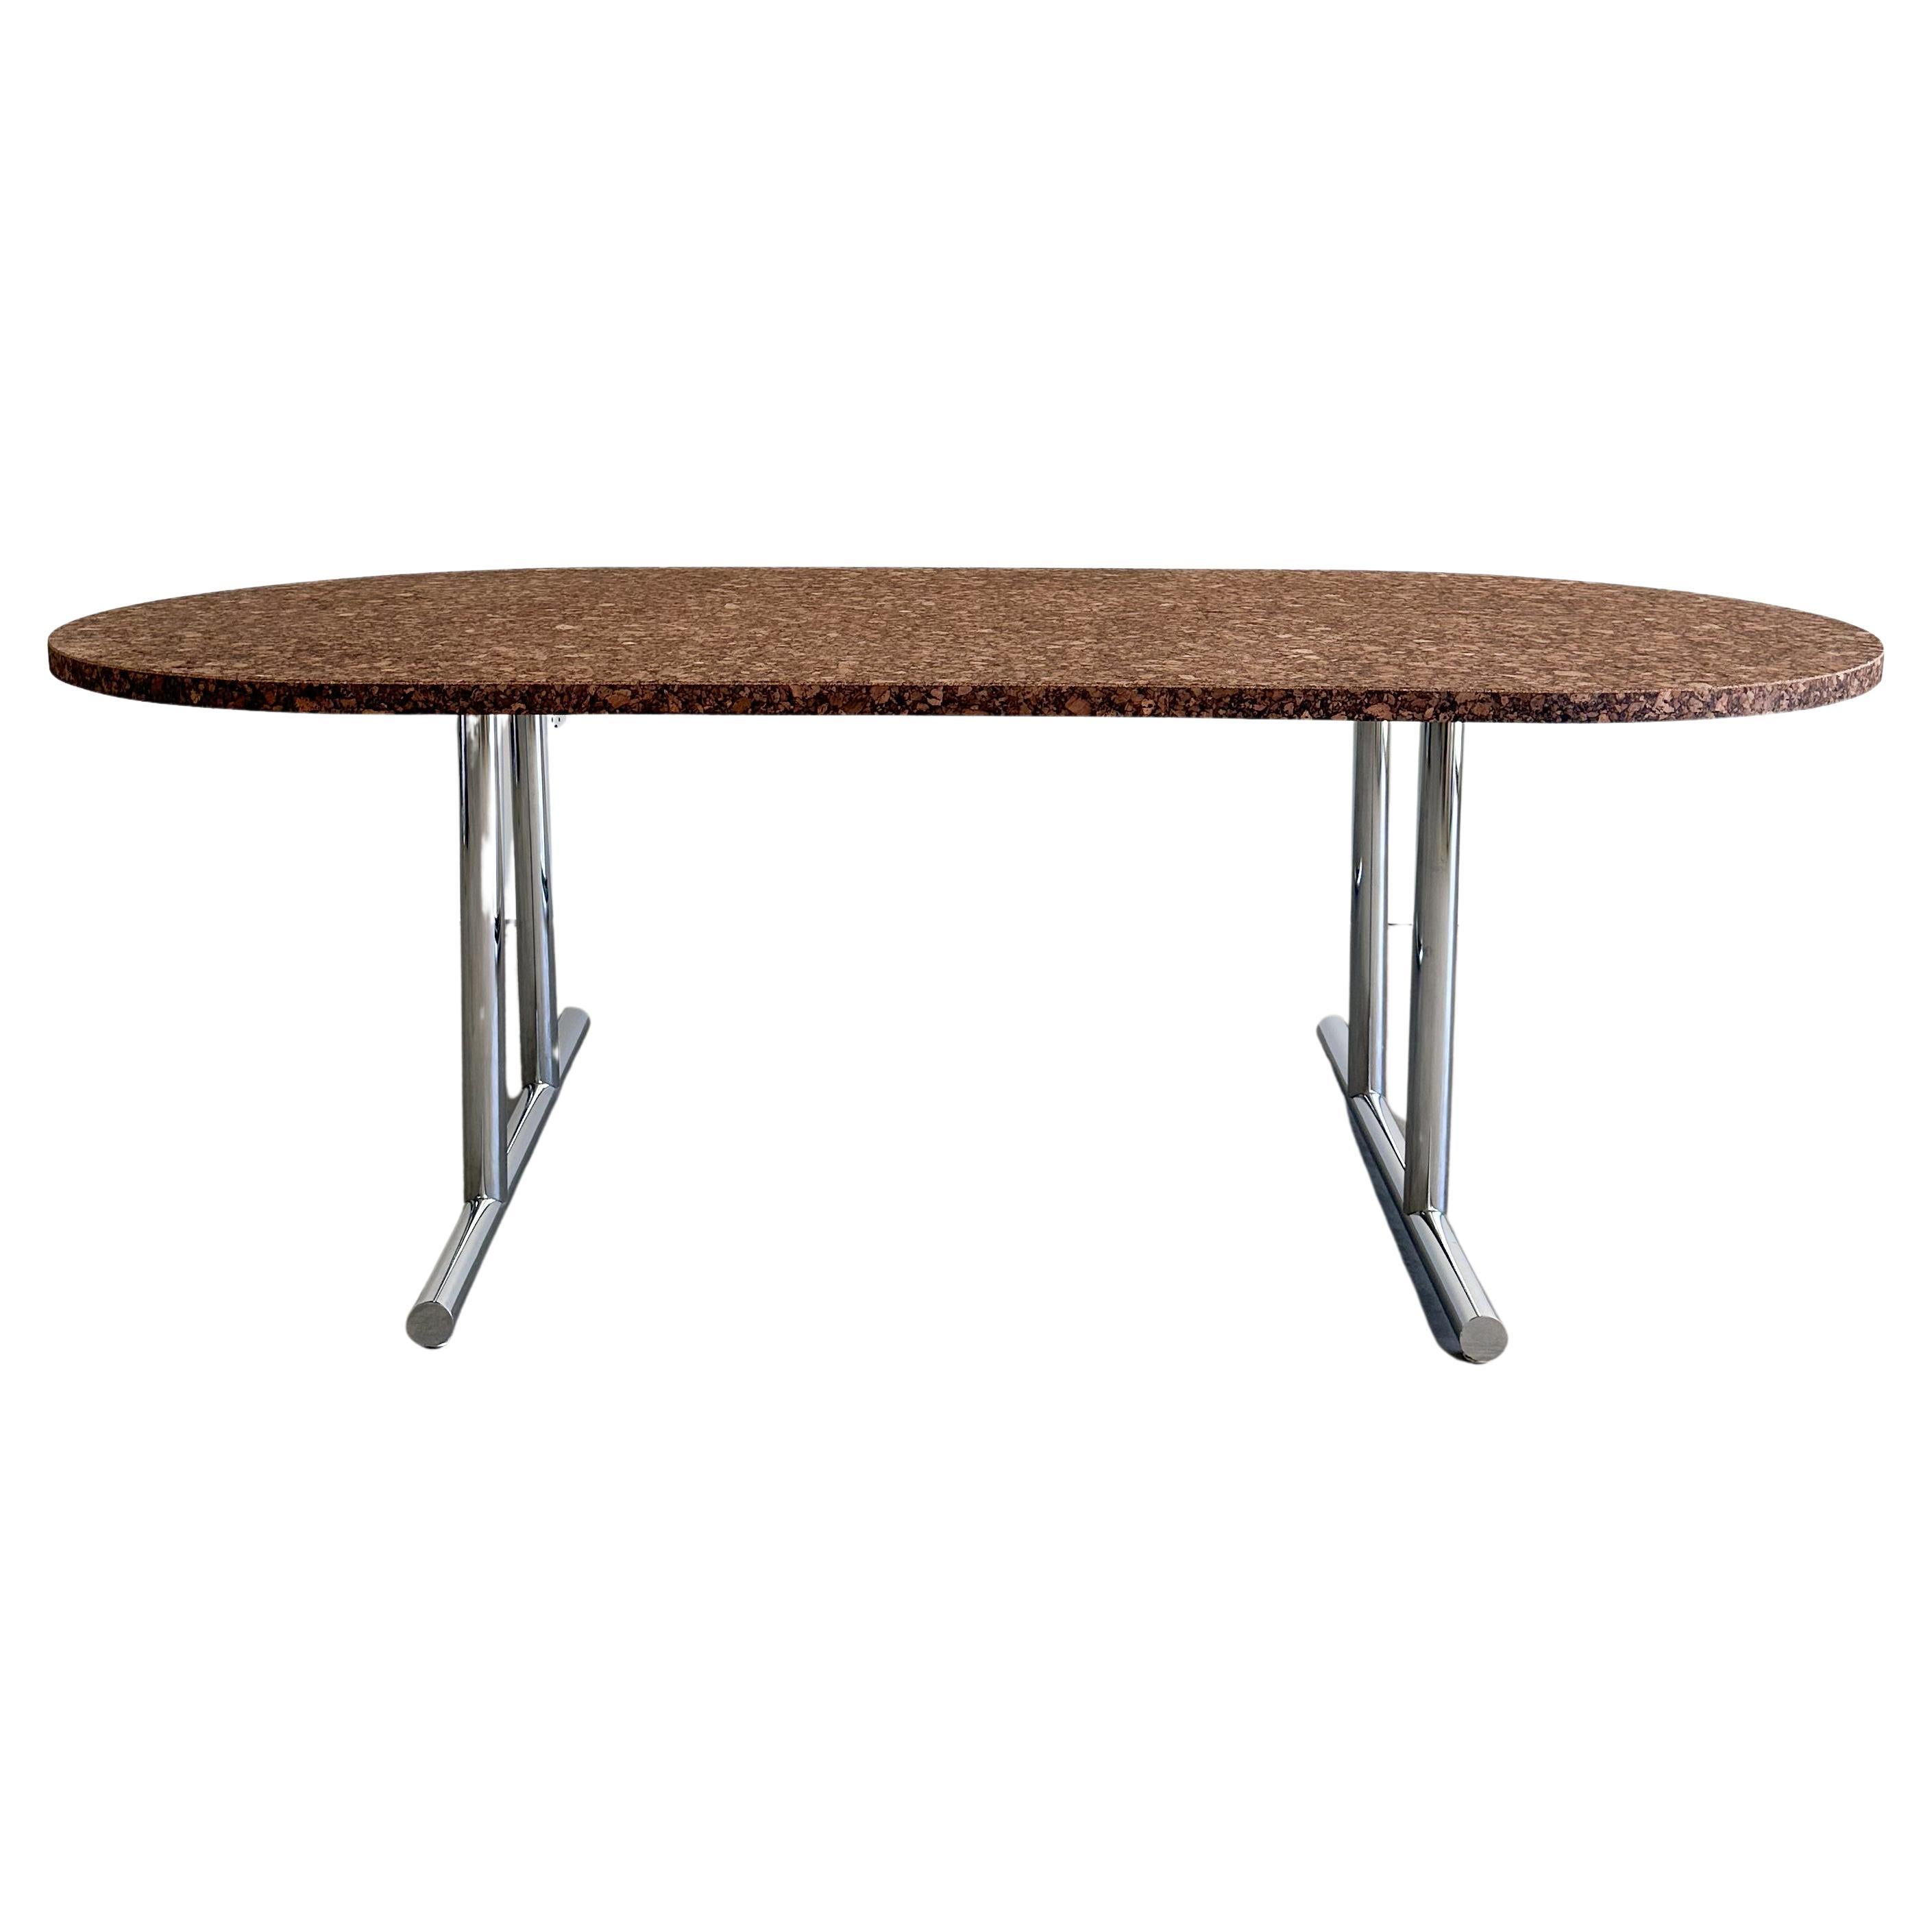 Vintage Cork And Chrome Oval Dining Table Conference Table Desk MCM Minimalist  For Sale